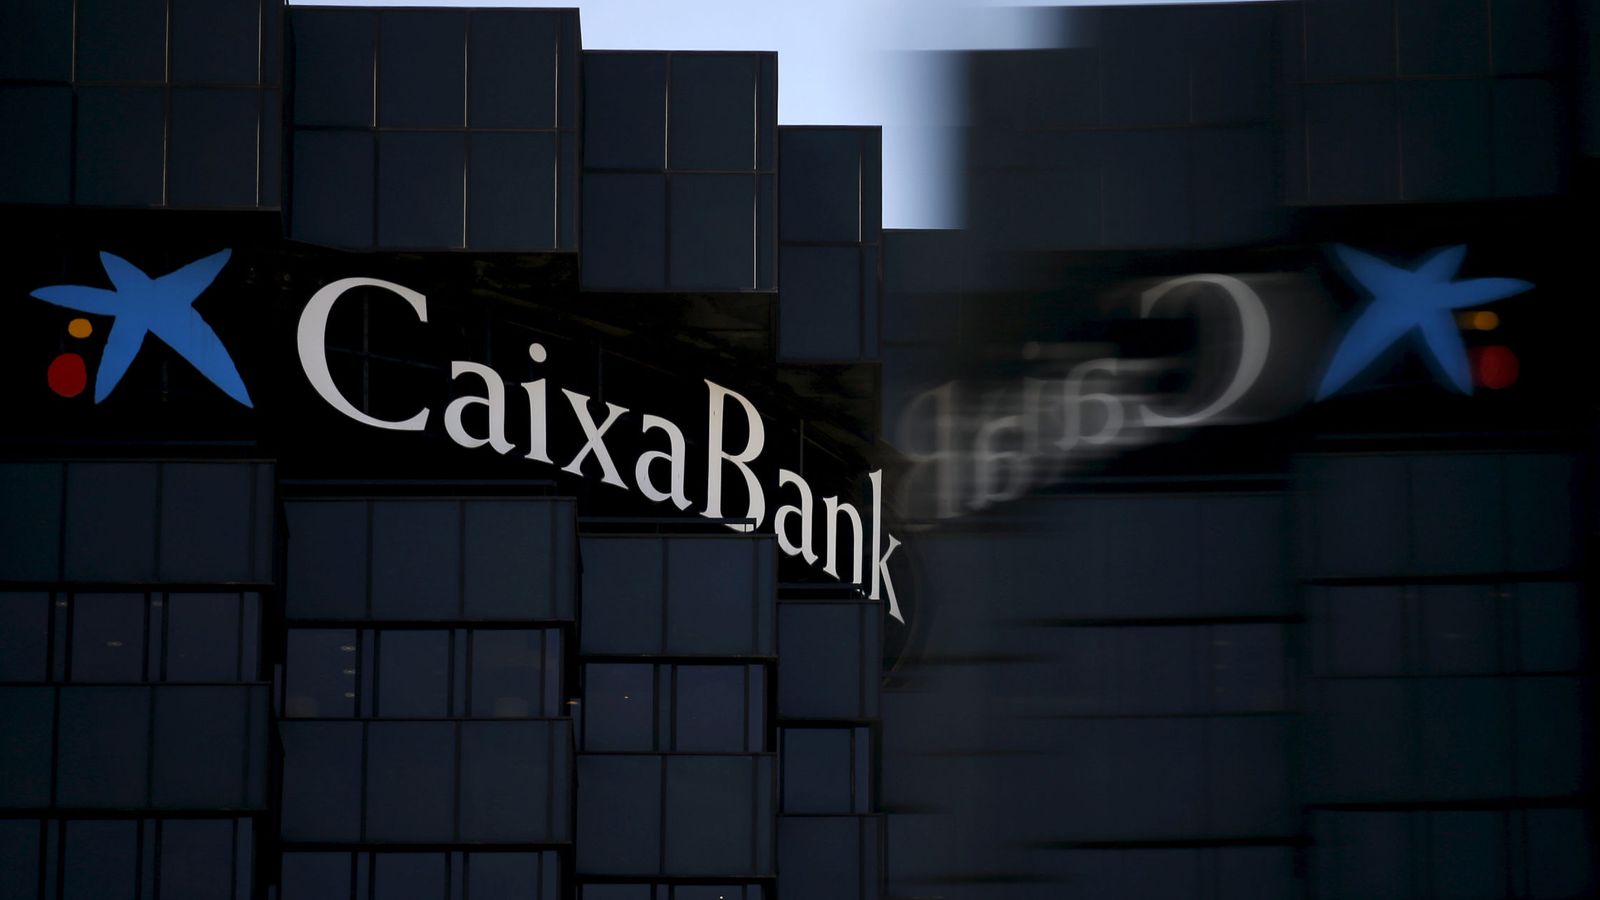 Foto: Caixabank's logo is reflected on a glass of an advertising window, at company's headquarters in barcelona